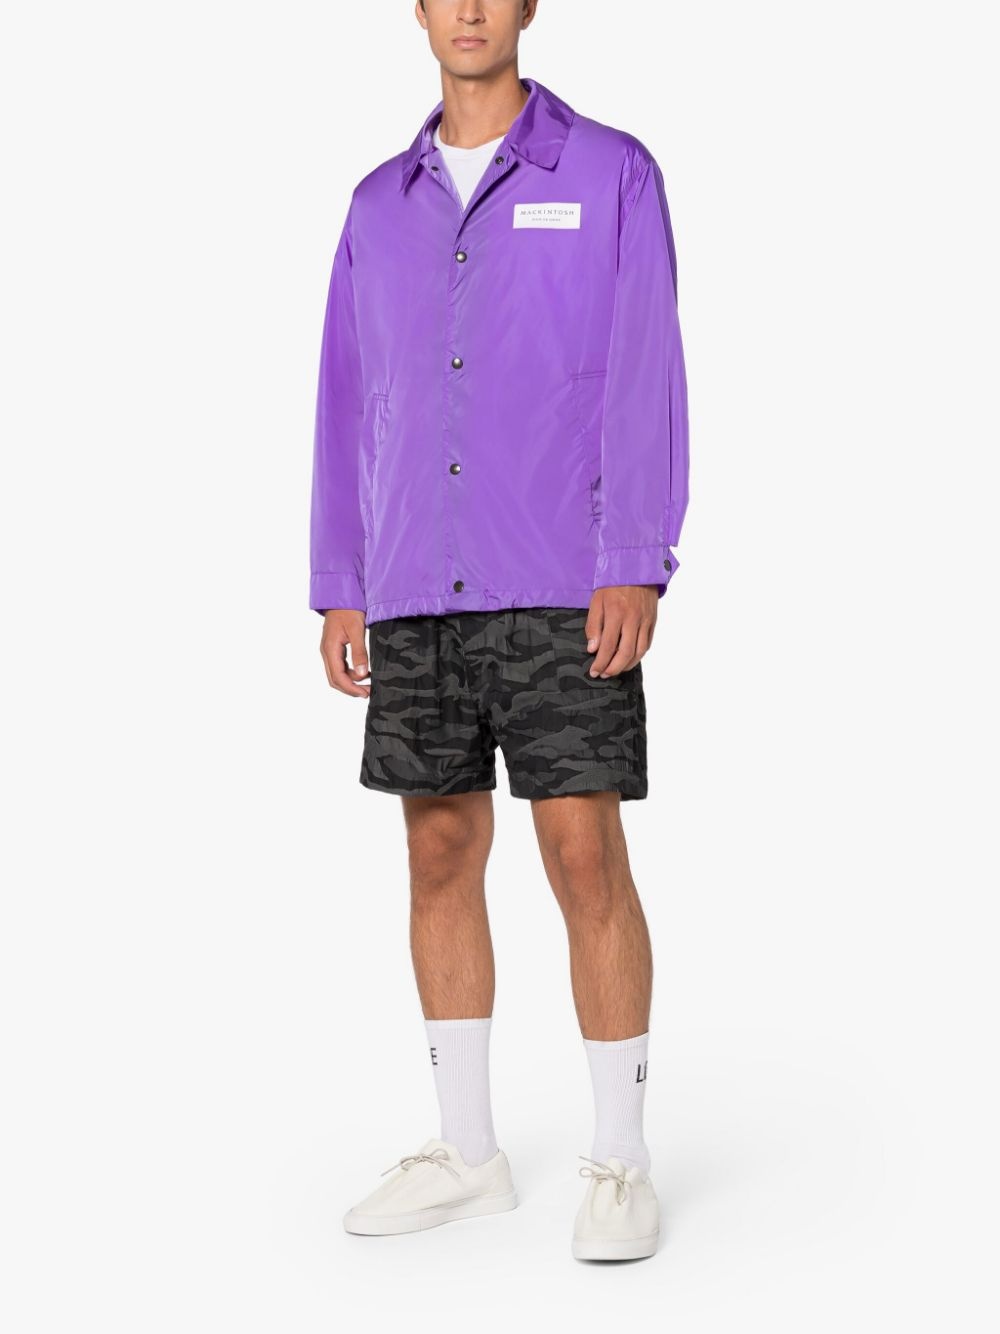 TEEMING LILAC NYLON PACKABLE COACH JACKET - 3